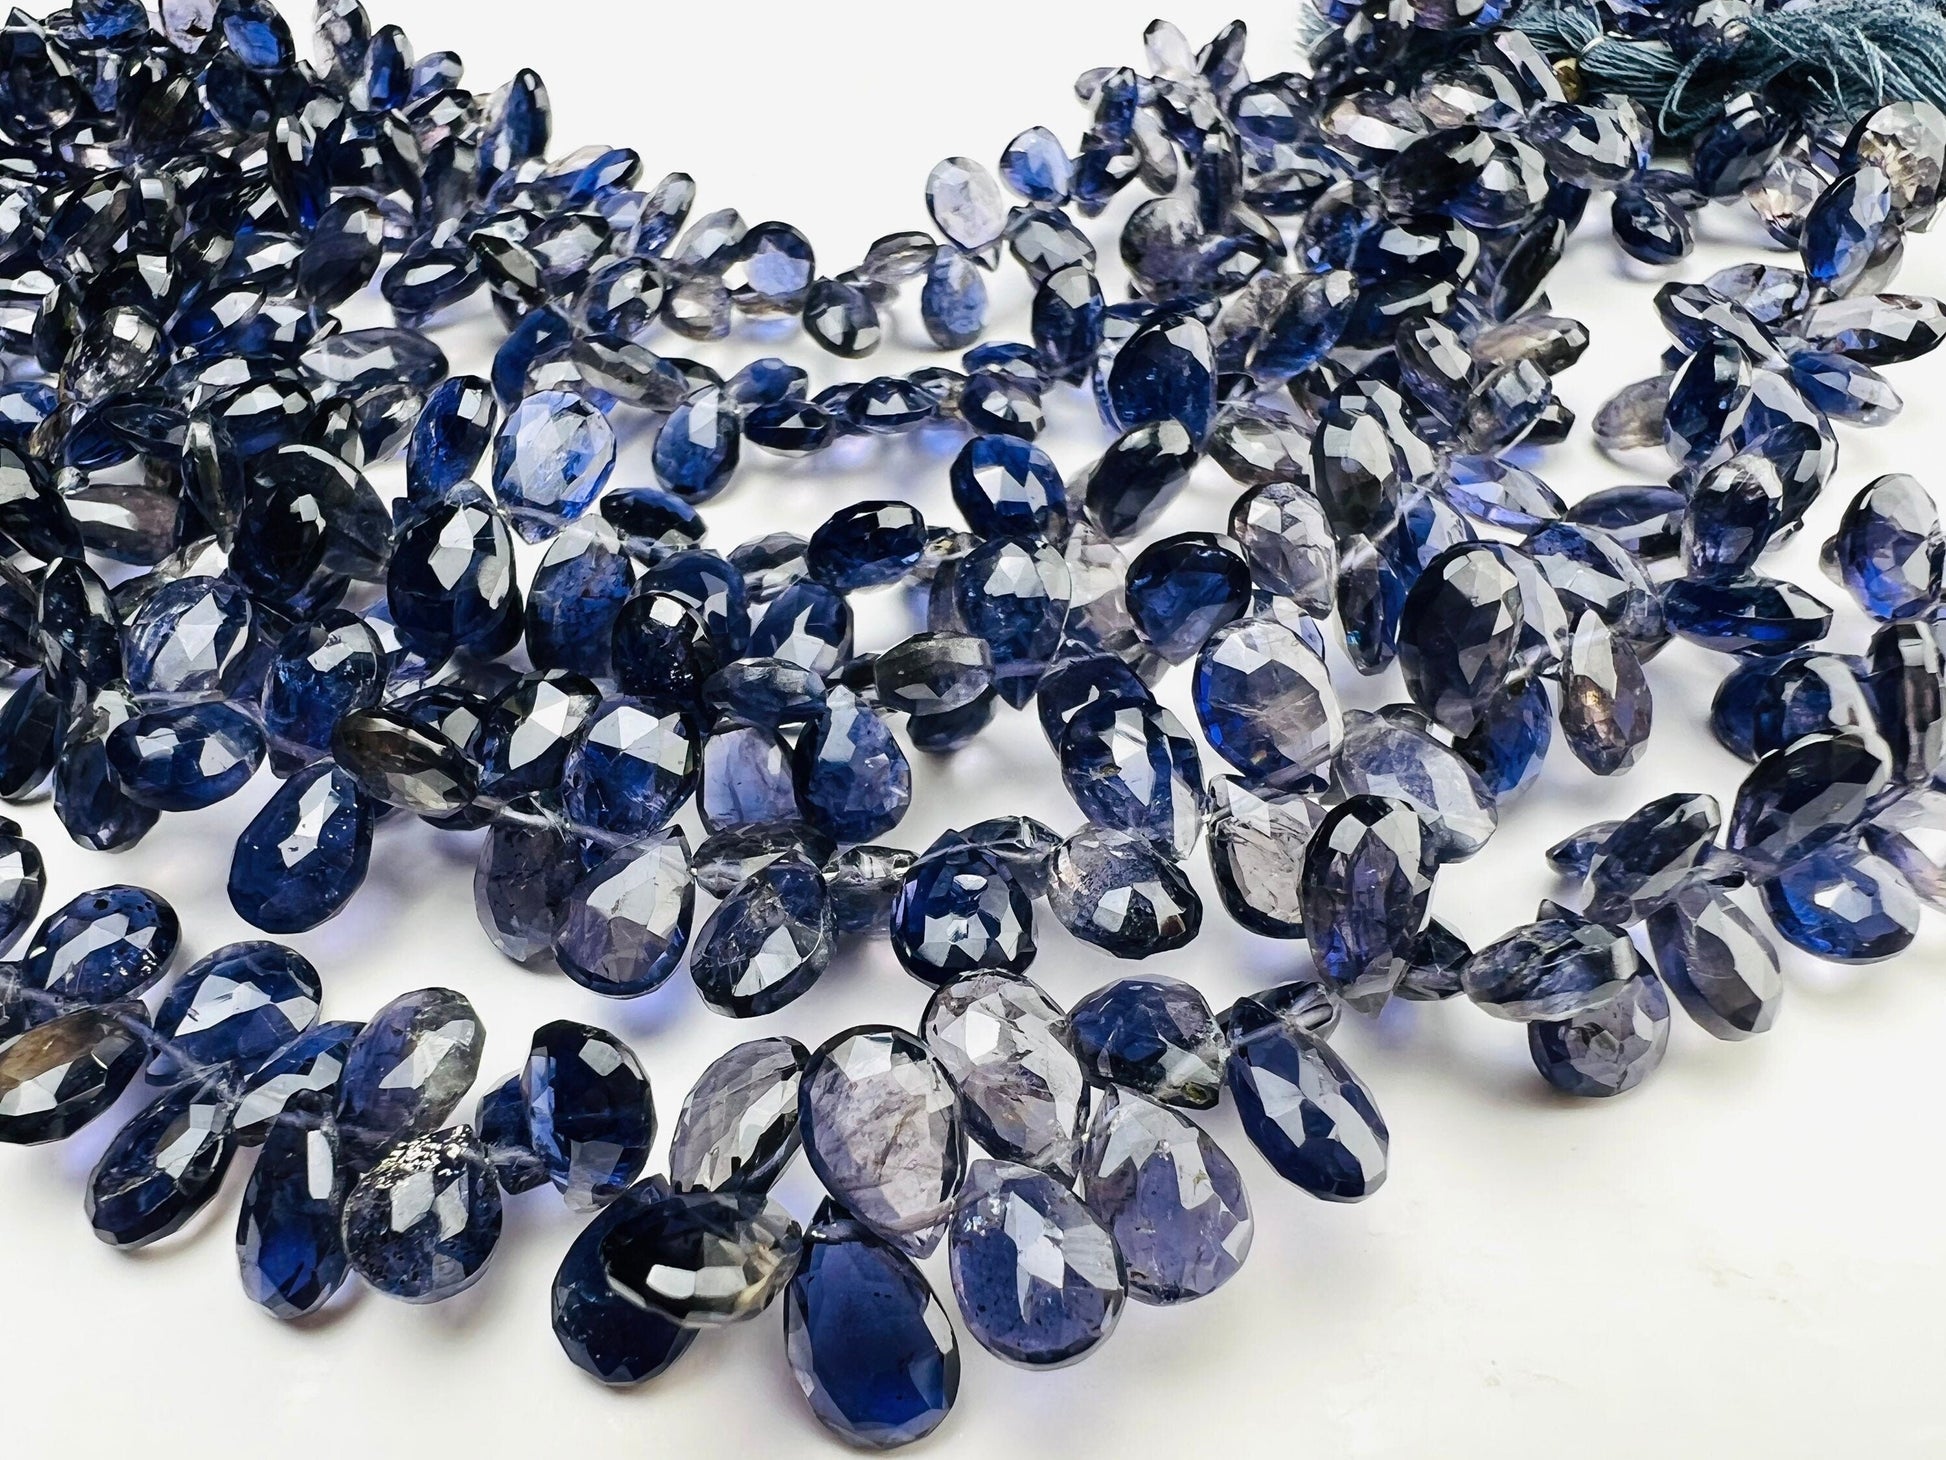 Genuine Iolite Faceted pear Drop Briolette 5.5-6x8-9.5mm Beautiful Rare Gemstone for Jewelry Making Beads,10,20,30pcs or 8” full st 70 pcs.